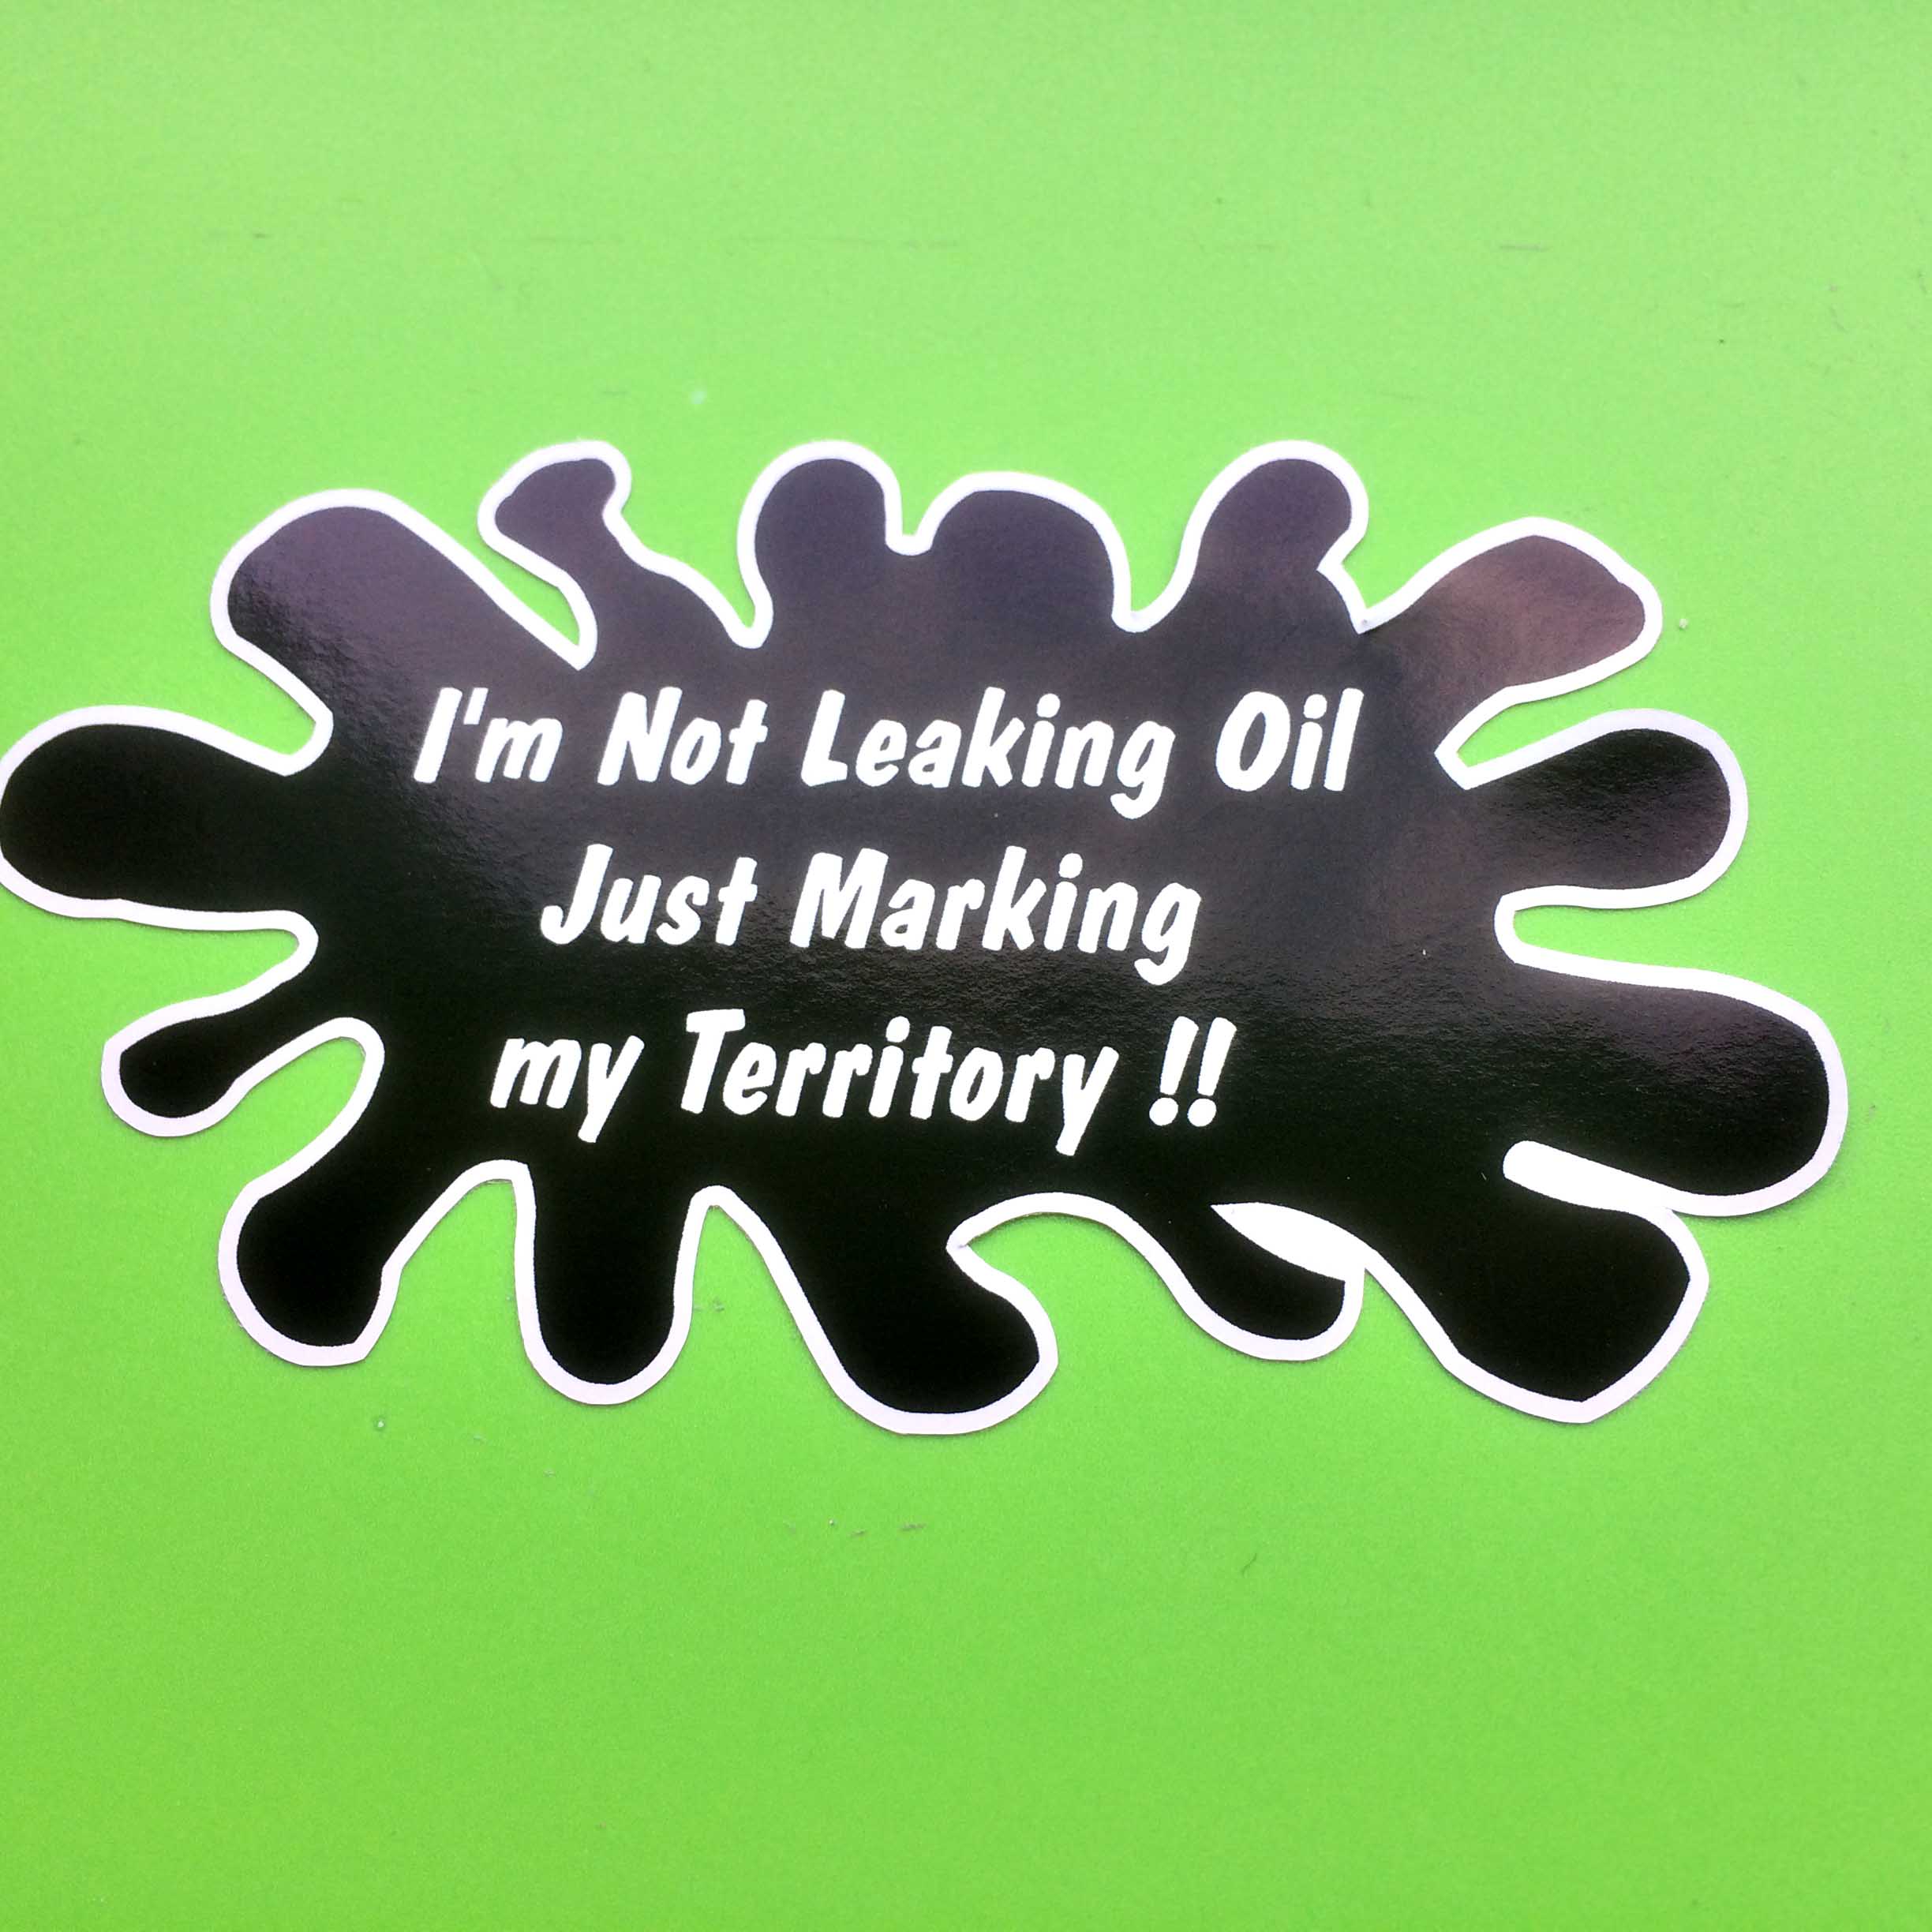 I'm Not Leaking Oil Just Marking my Territory!! in white lettering on a black oil splat.